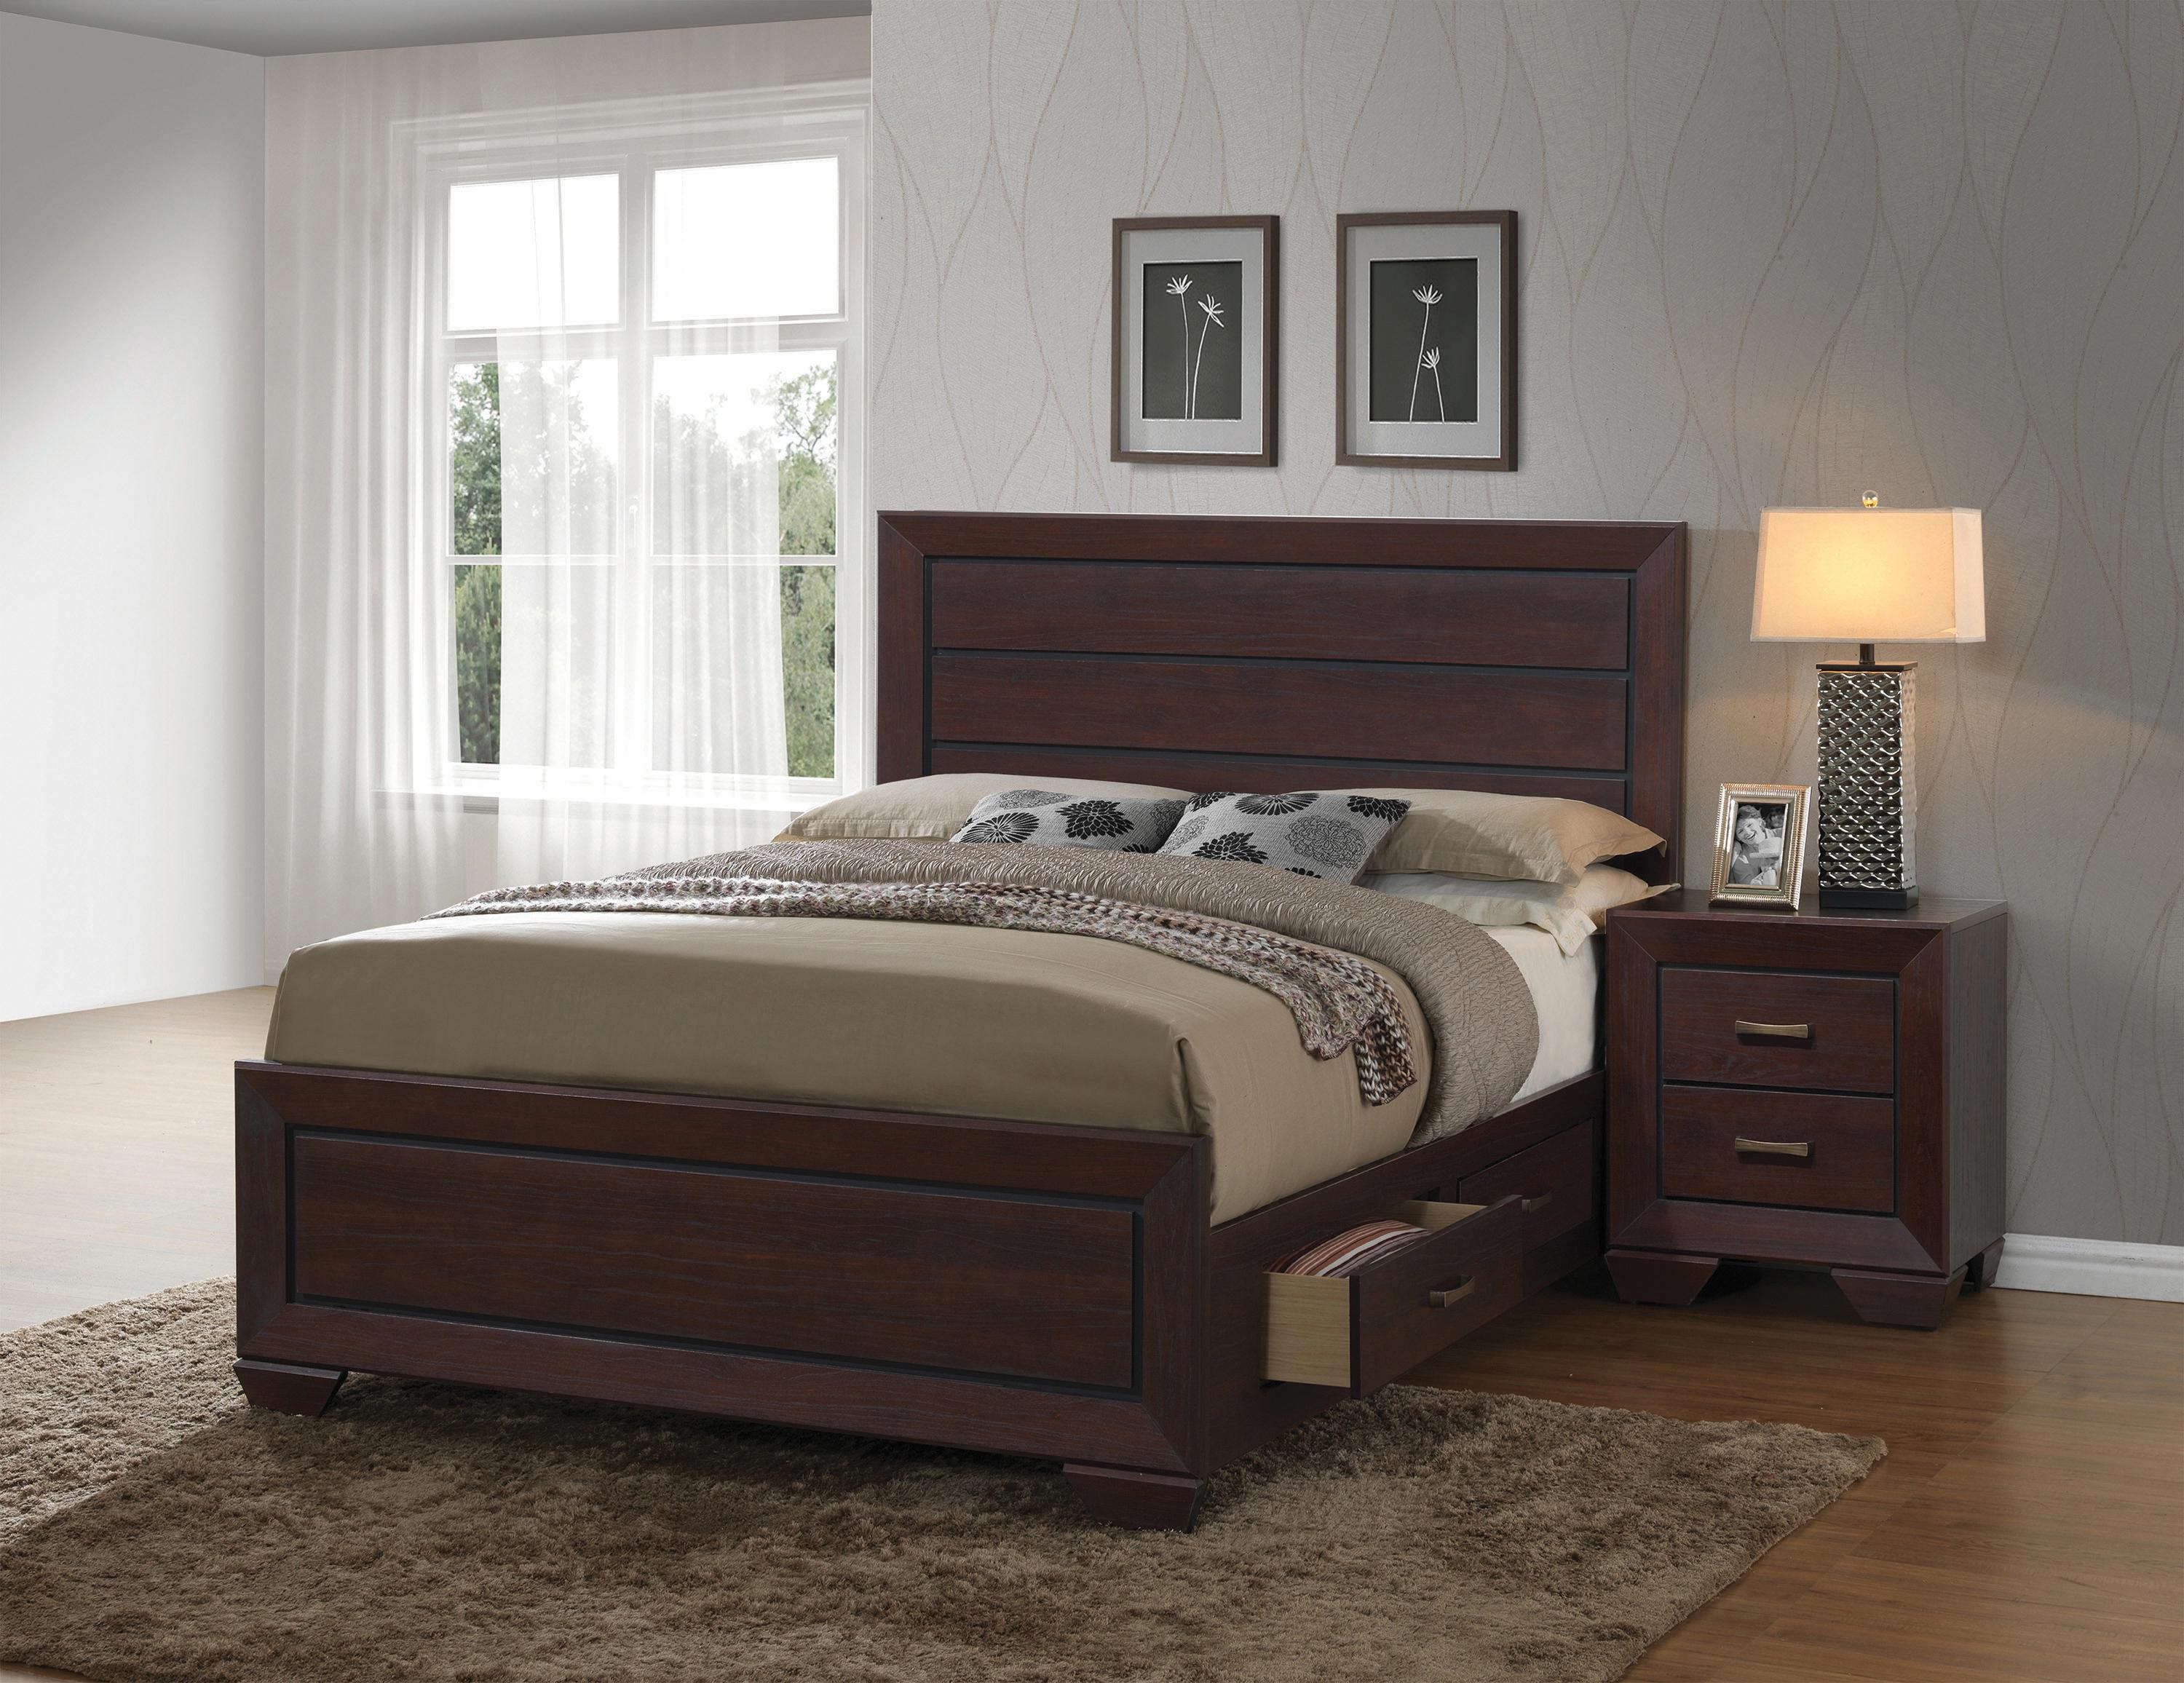 Transitional Bedroom Set 204390Q-3PC Kauffman 204390Q-3PC in Cocoa 